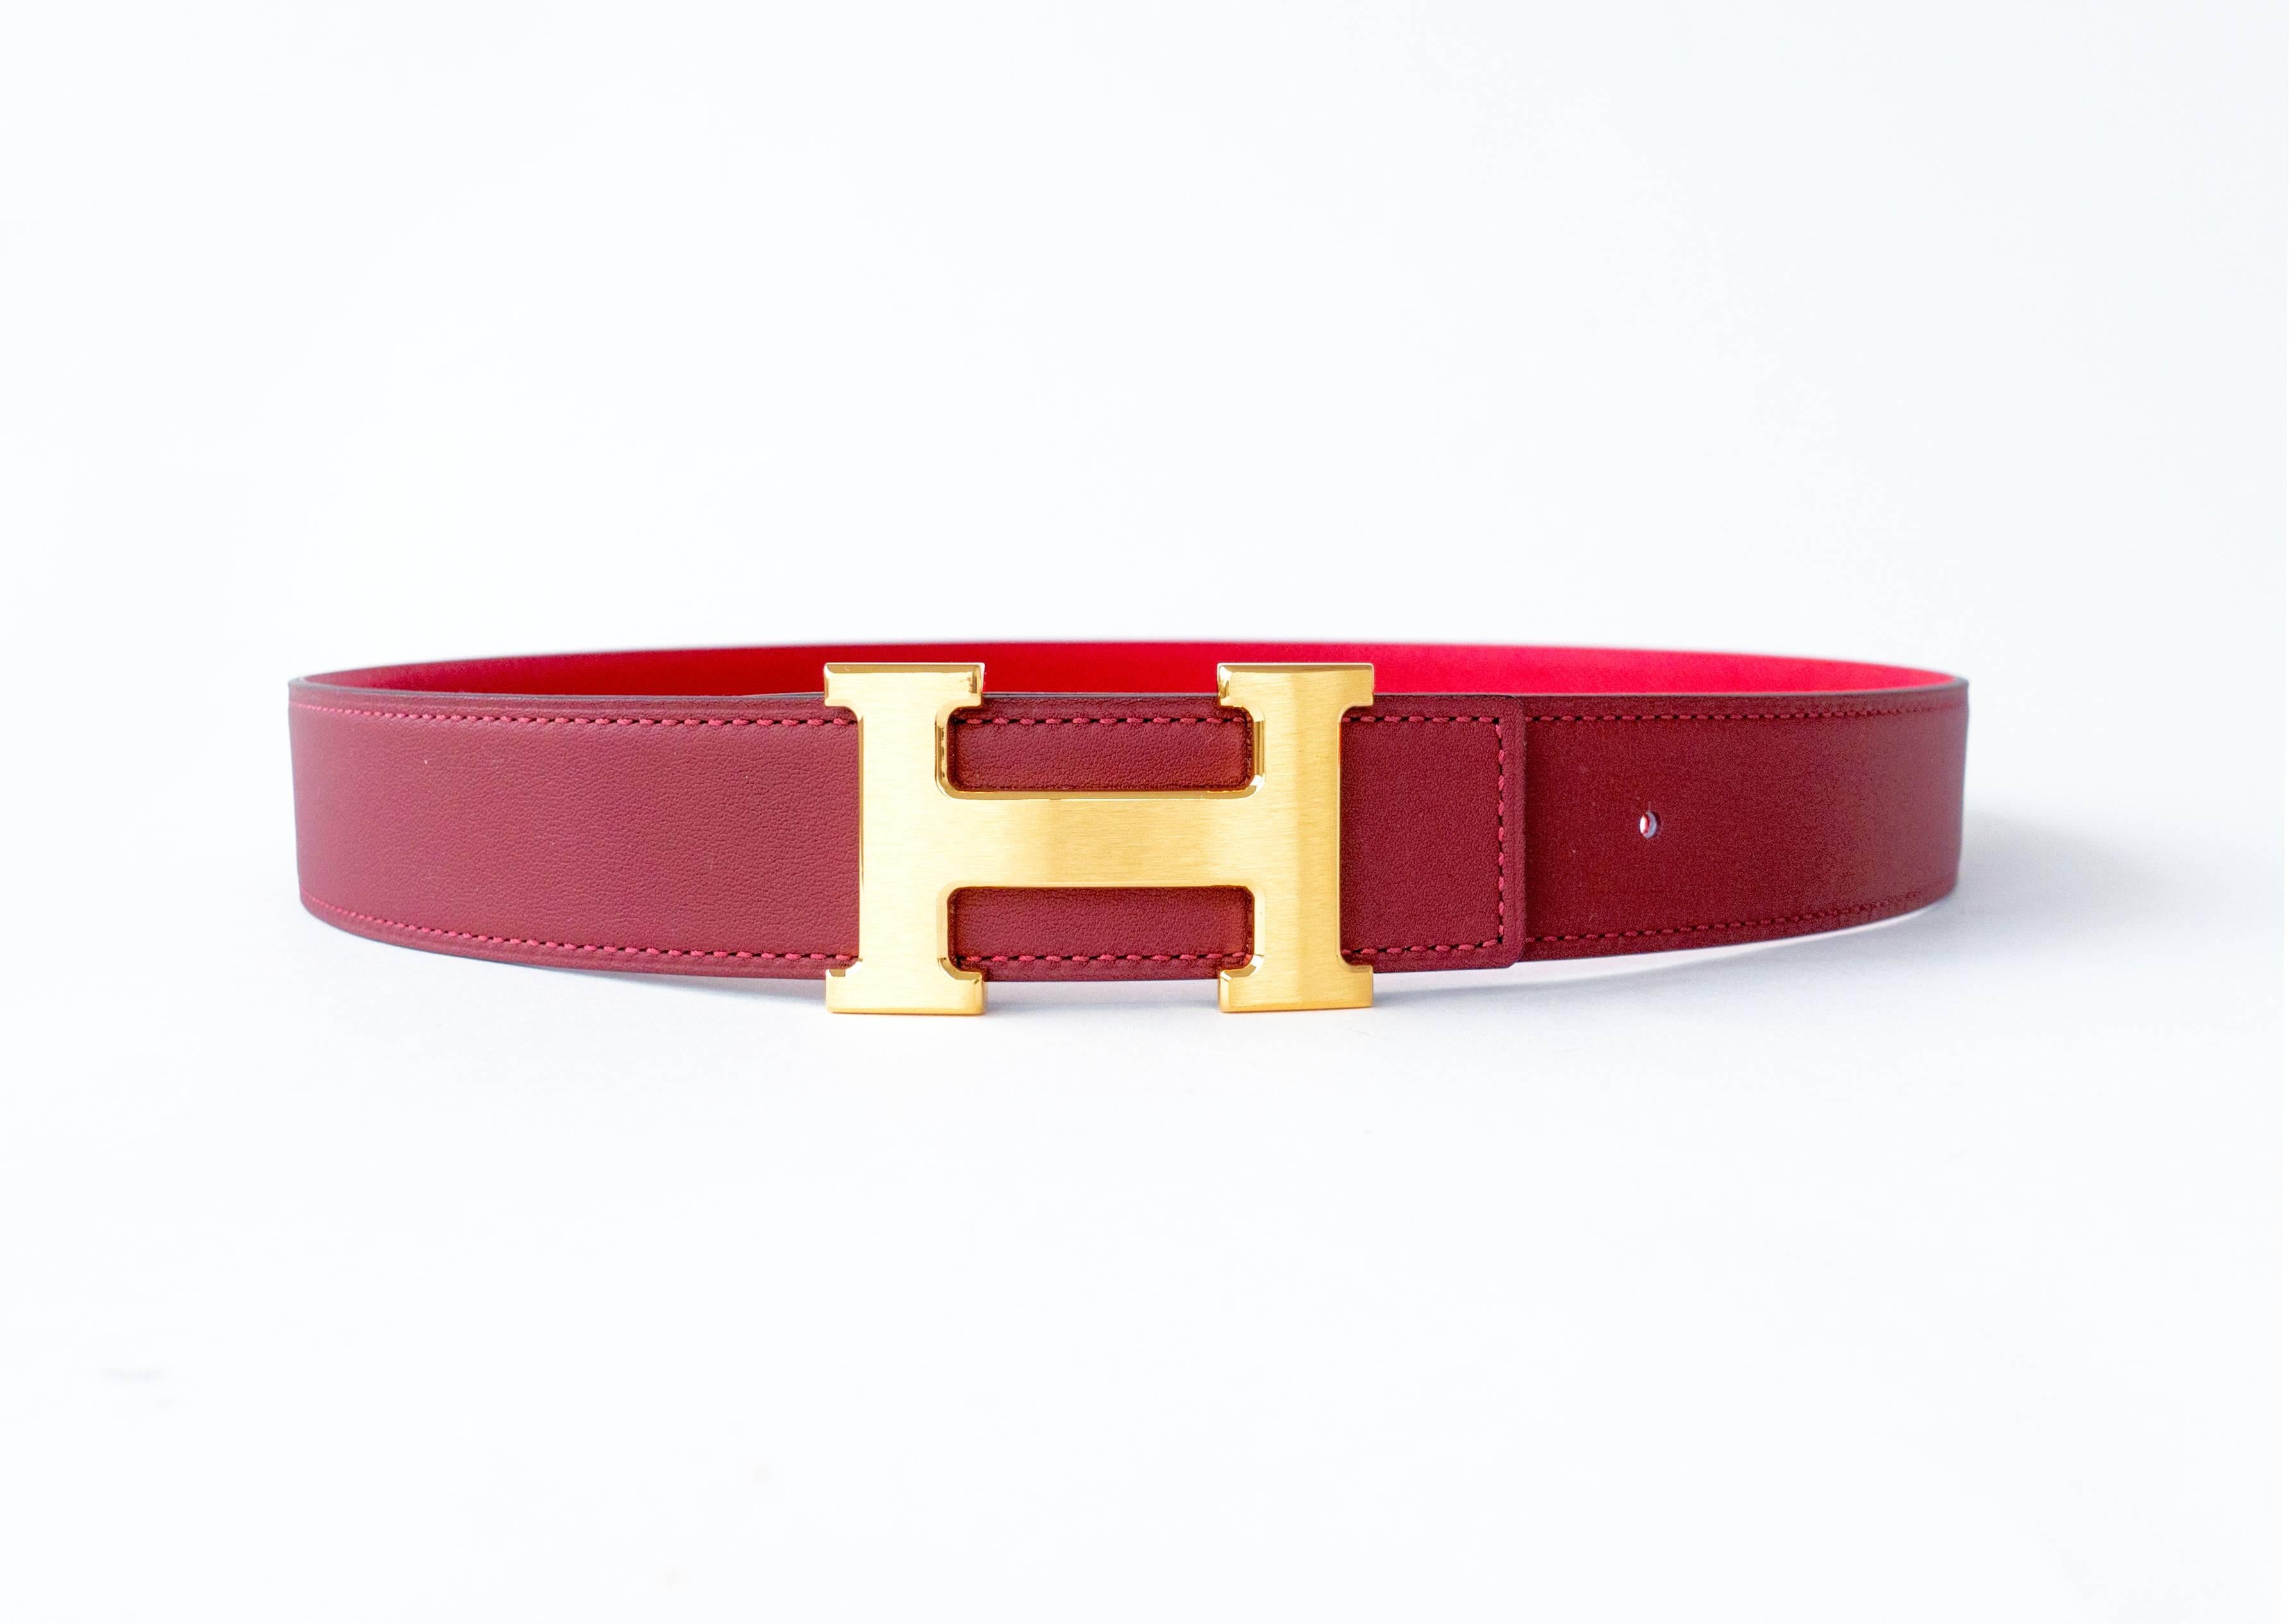 Hermes Rouge Casaque Gold Buckle Rouge H Red 85cm H Constance Belt Kit 
Store fresh. Pristine condition. 
Perfect gift! Comes full set with Hermes belt strap, belt buckle, sleeper for belt buckle, and orange Hermes belt box. 
One of the most